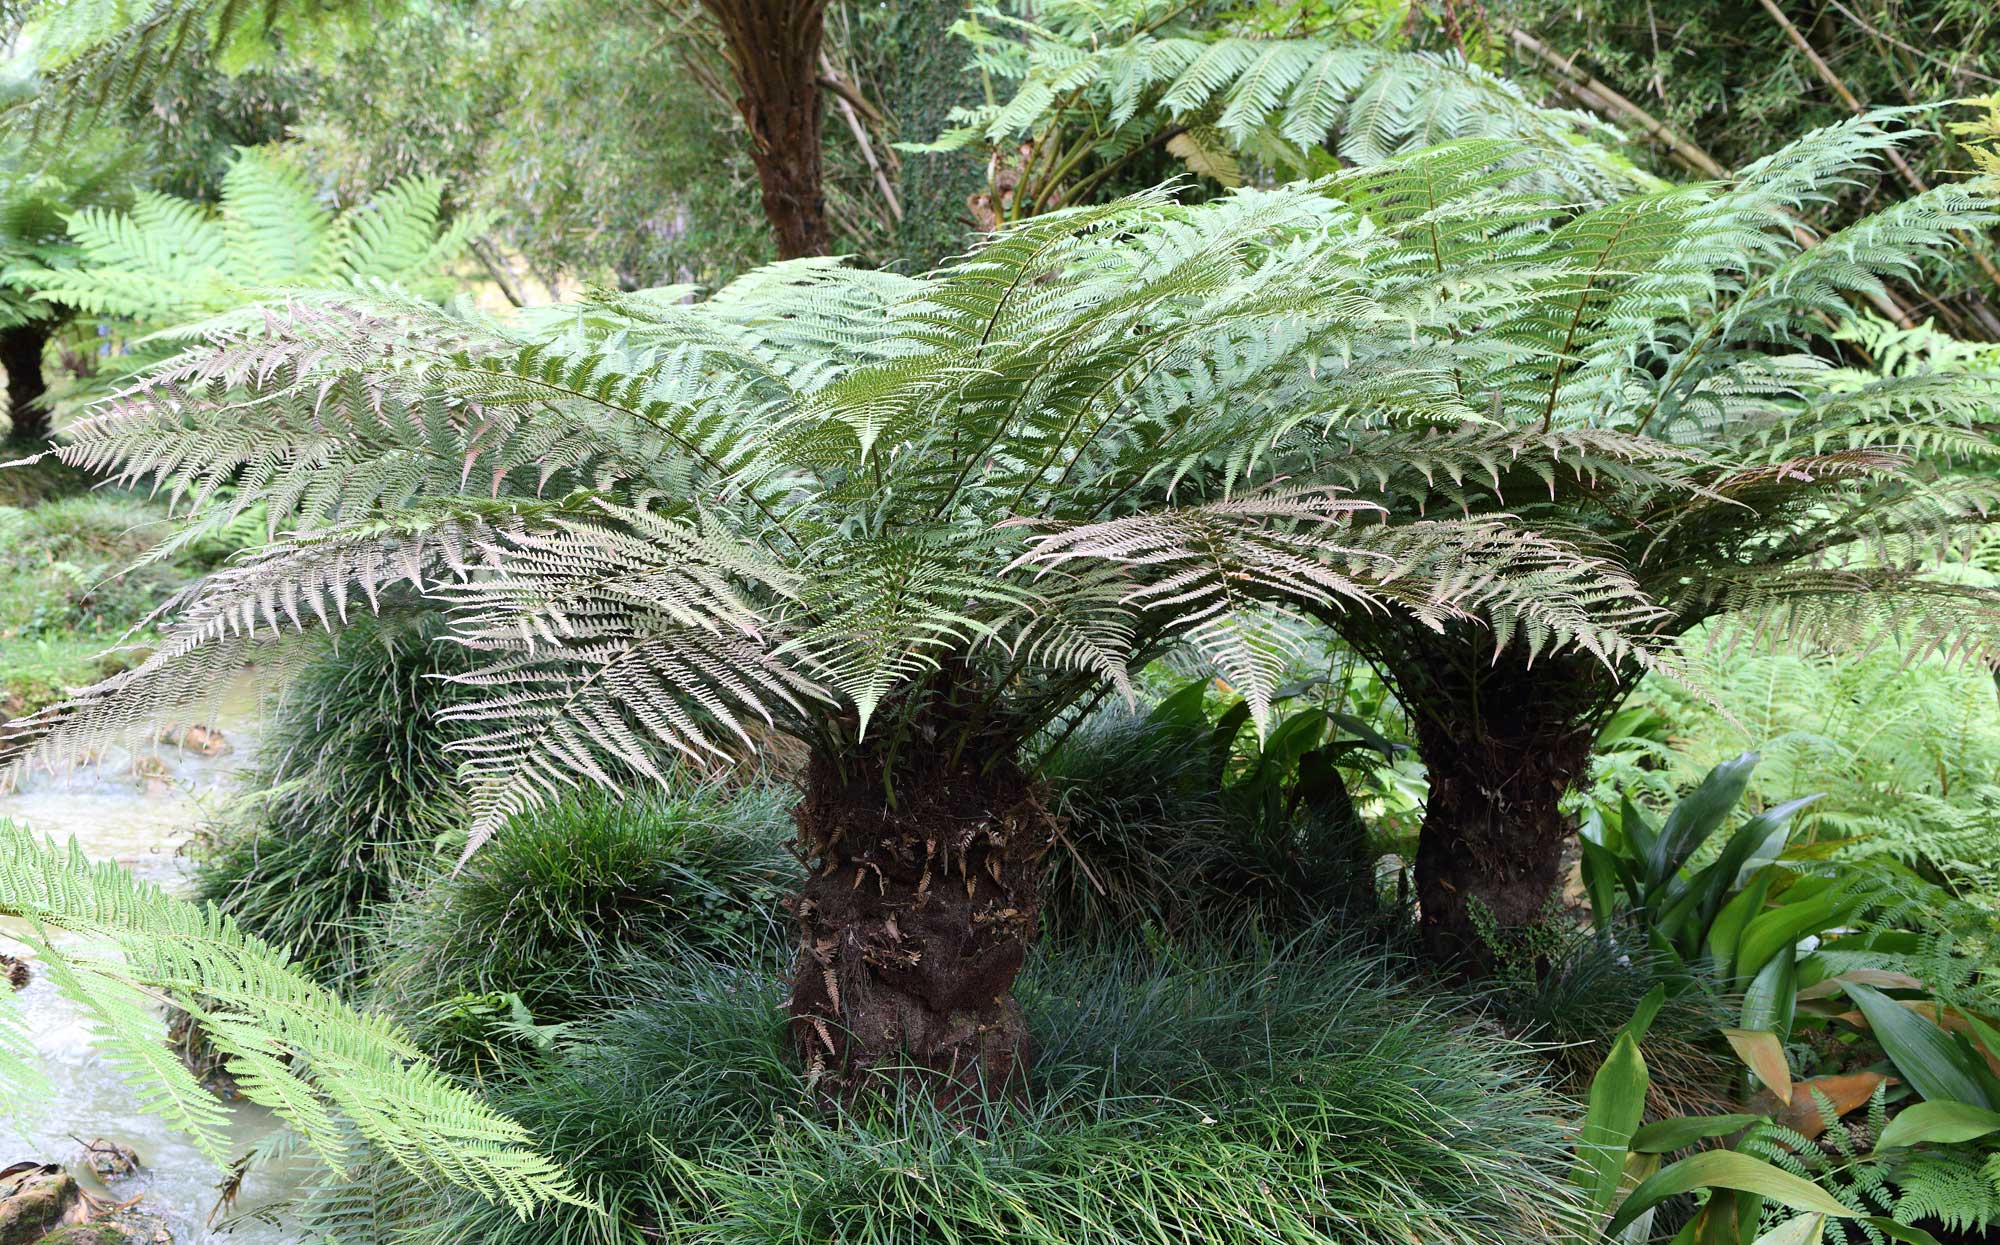 Photograph of two tree ferns. Each plant has a short, columnar stem with a flush of pinnately compound leaves at the top, giving it a palm-like appearance.